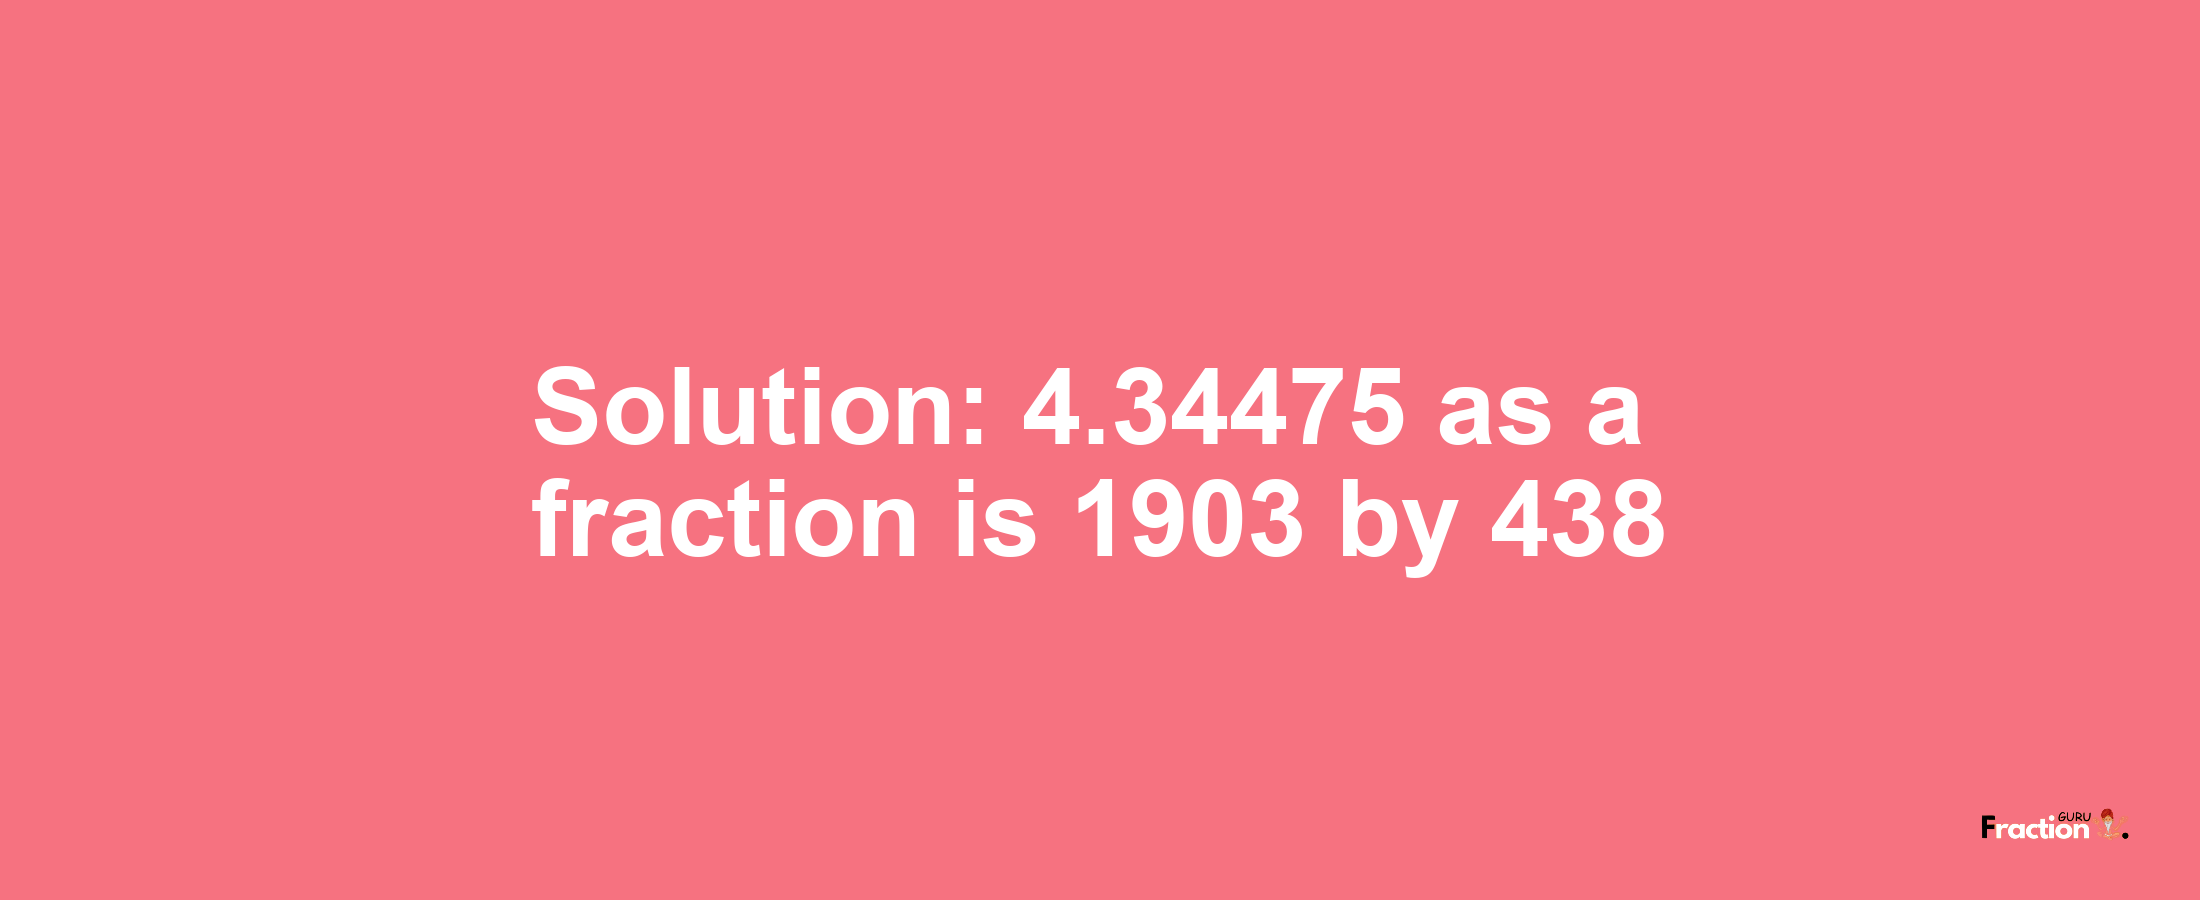 Solution:4.34475 as a fraction is 1903/438